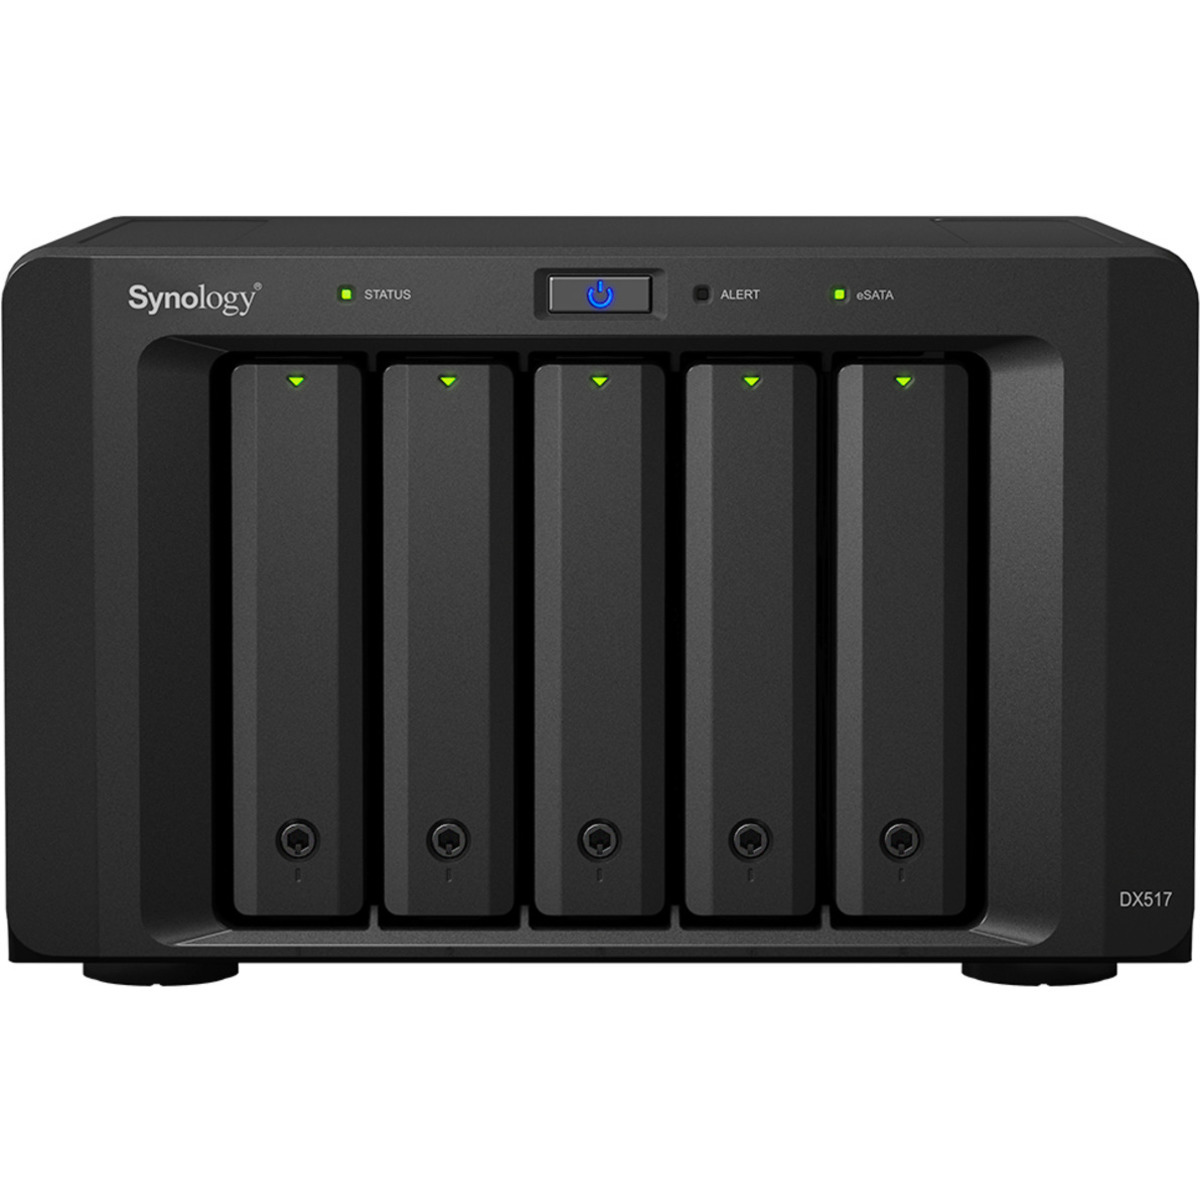 buy $1905 Synology DX517 10tb Desktop Expansion Enclosure 5x2000gb Western Digital Red SA500 WDS200T1R0A 2.5 SATA 6Gb/s SSD NAS Class Drives Installed - Burn-In Tested - nas headquarters buy network attached storage server device das new raid-5 free shipping usa DX517